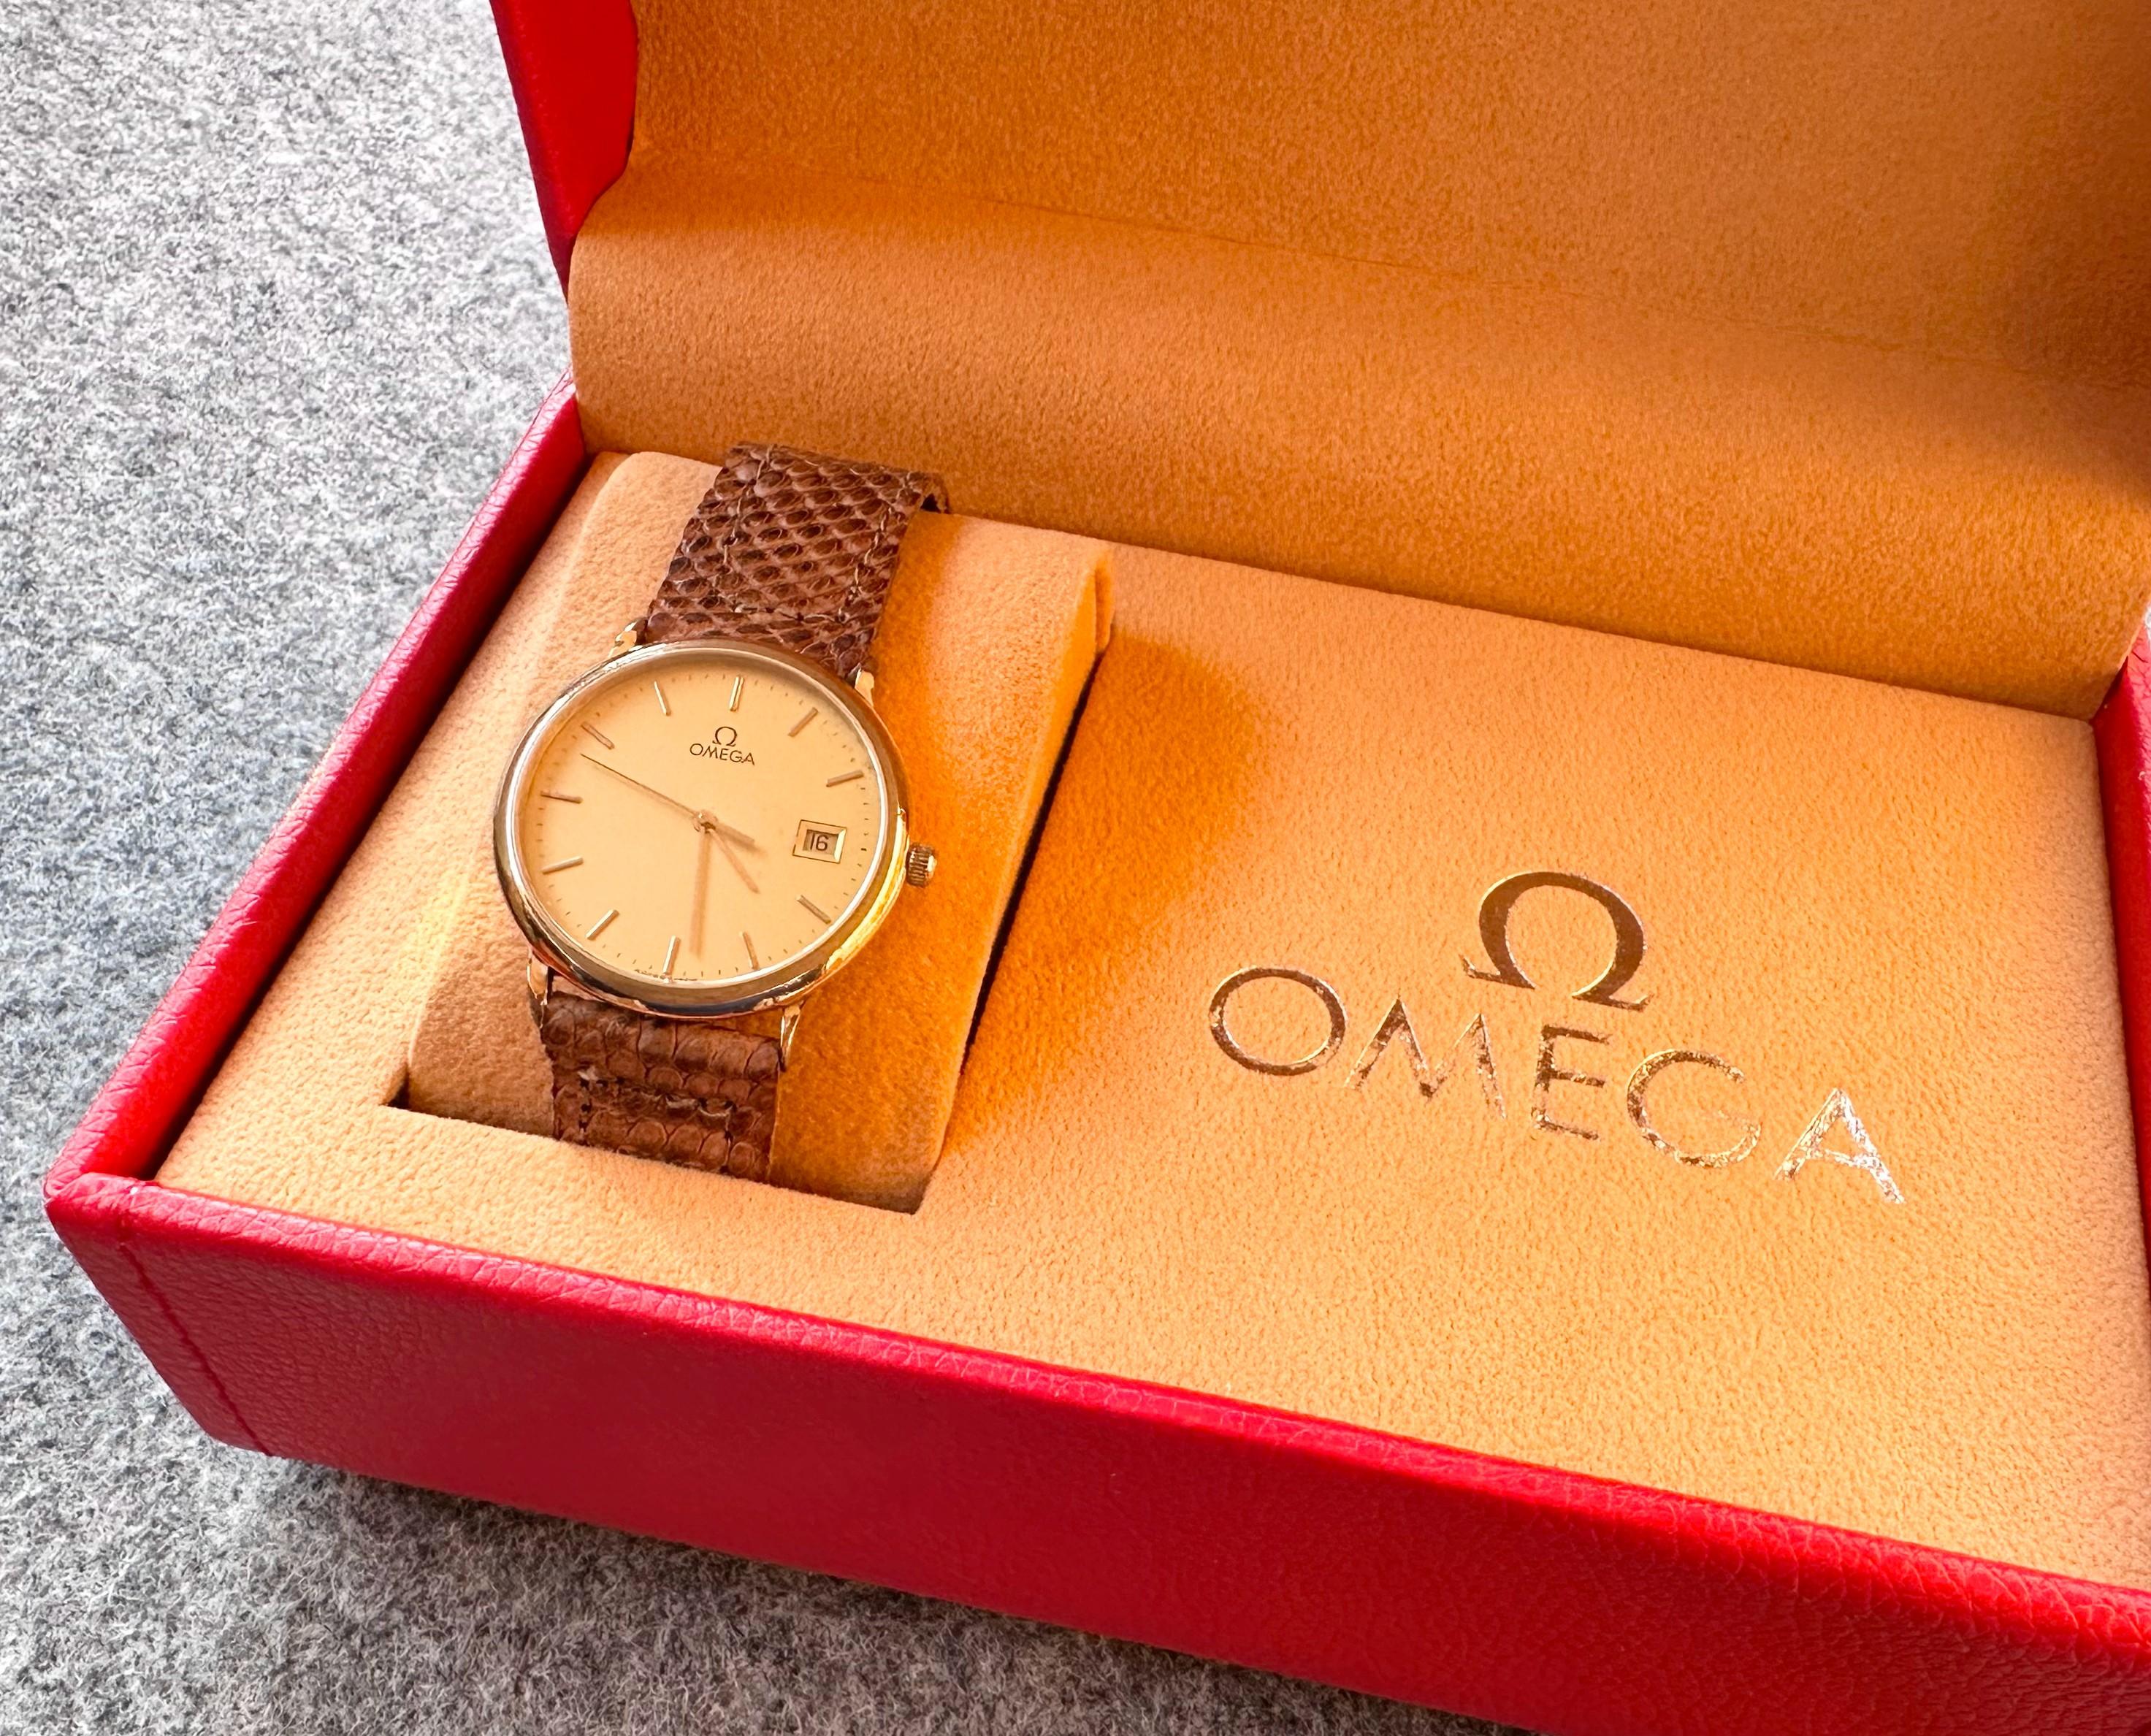 Brand: Omega

Reference Number: 53124687

Features: Gold Plated-Golden Dial

Country Of Manufacture: Switzerland

Movement: Quartz 1430

Case Material: Gold Plated- Stainless steel

Measurements : Case width: 32 mm (without crown)

Band Type :